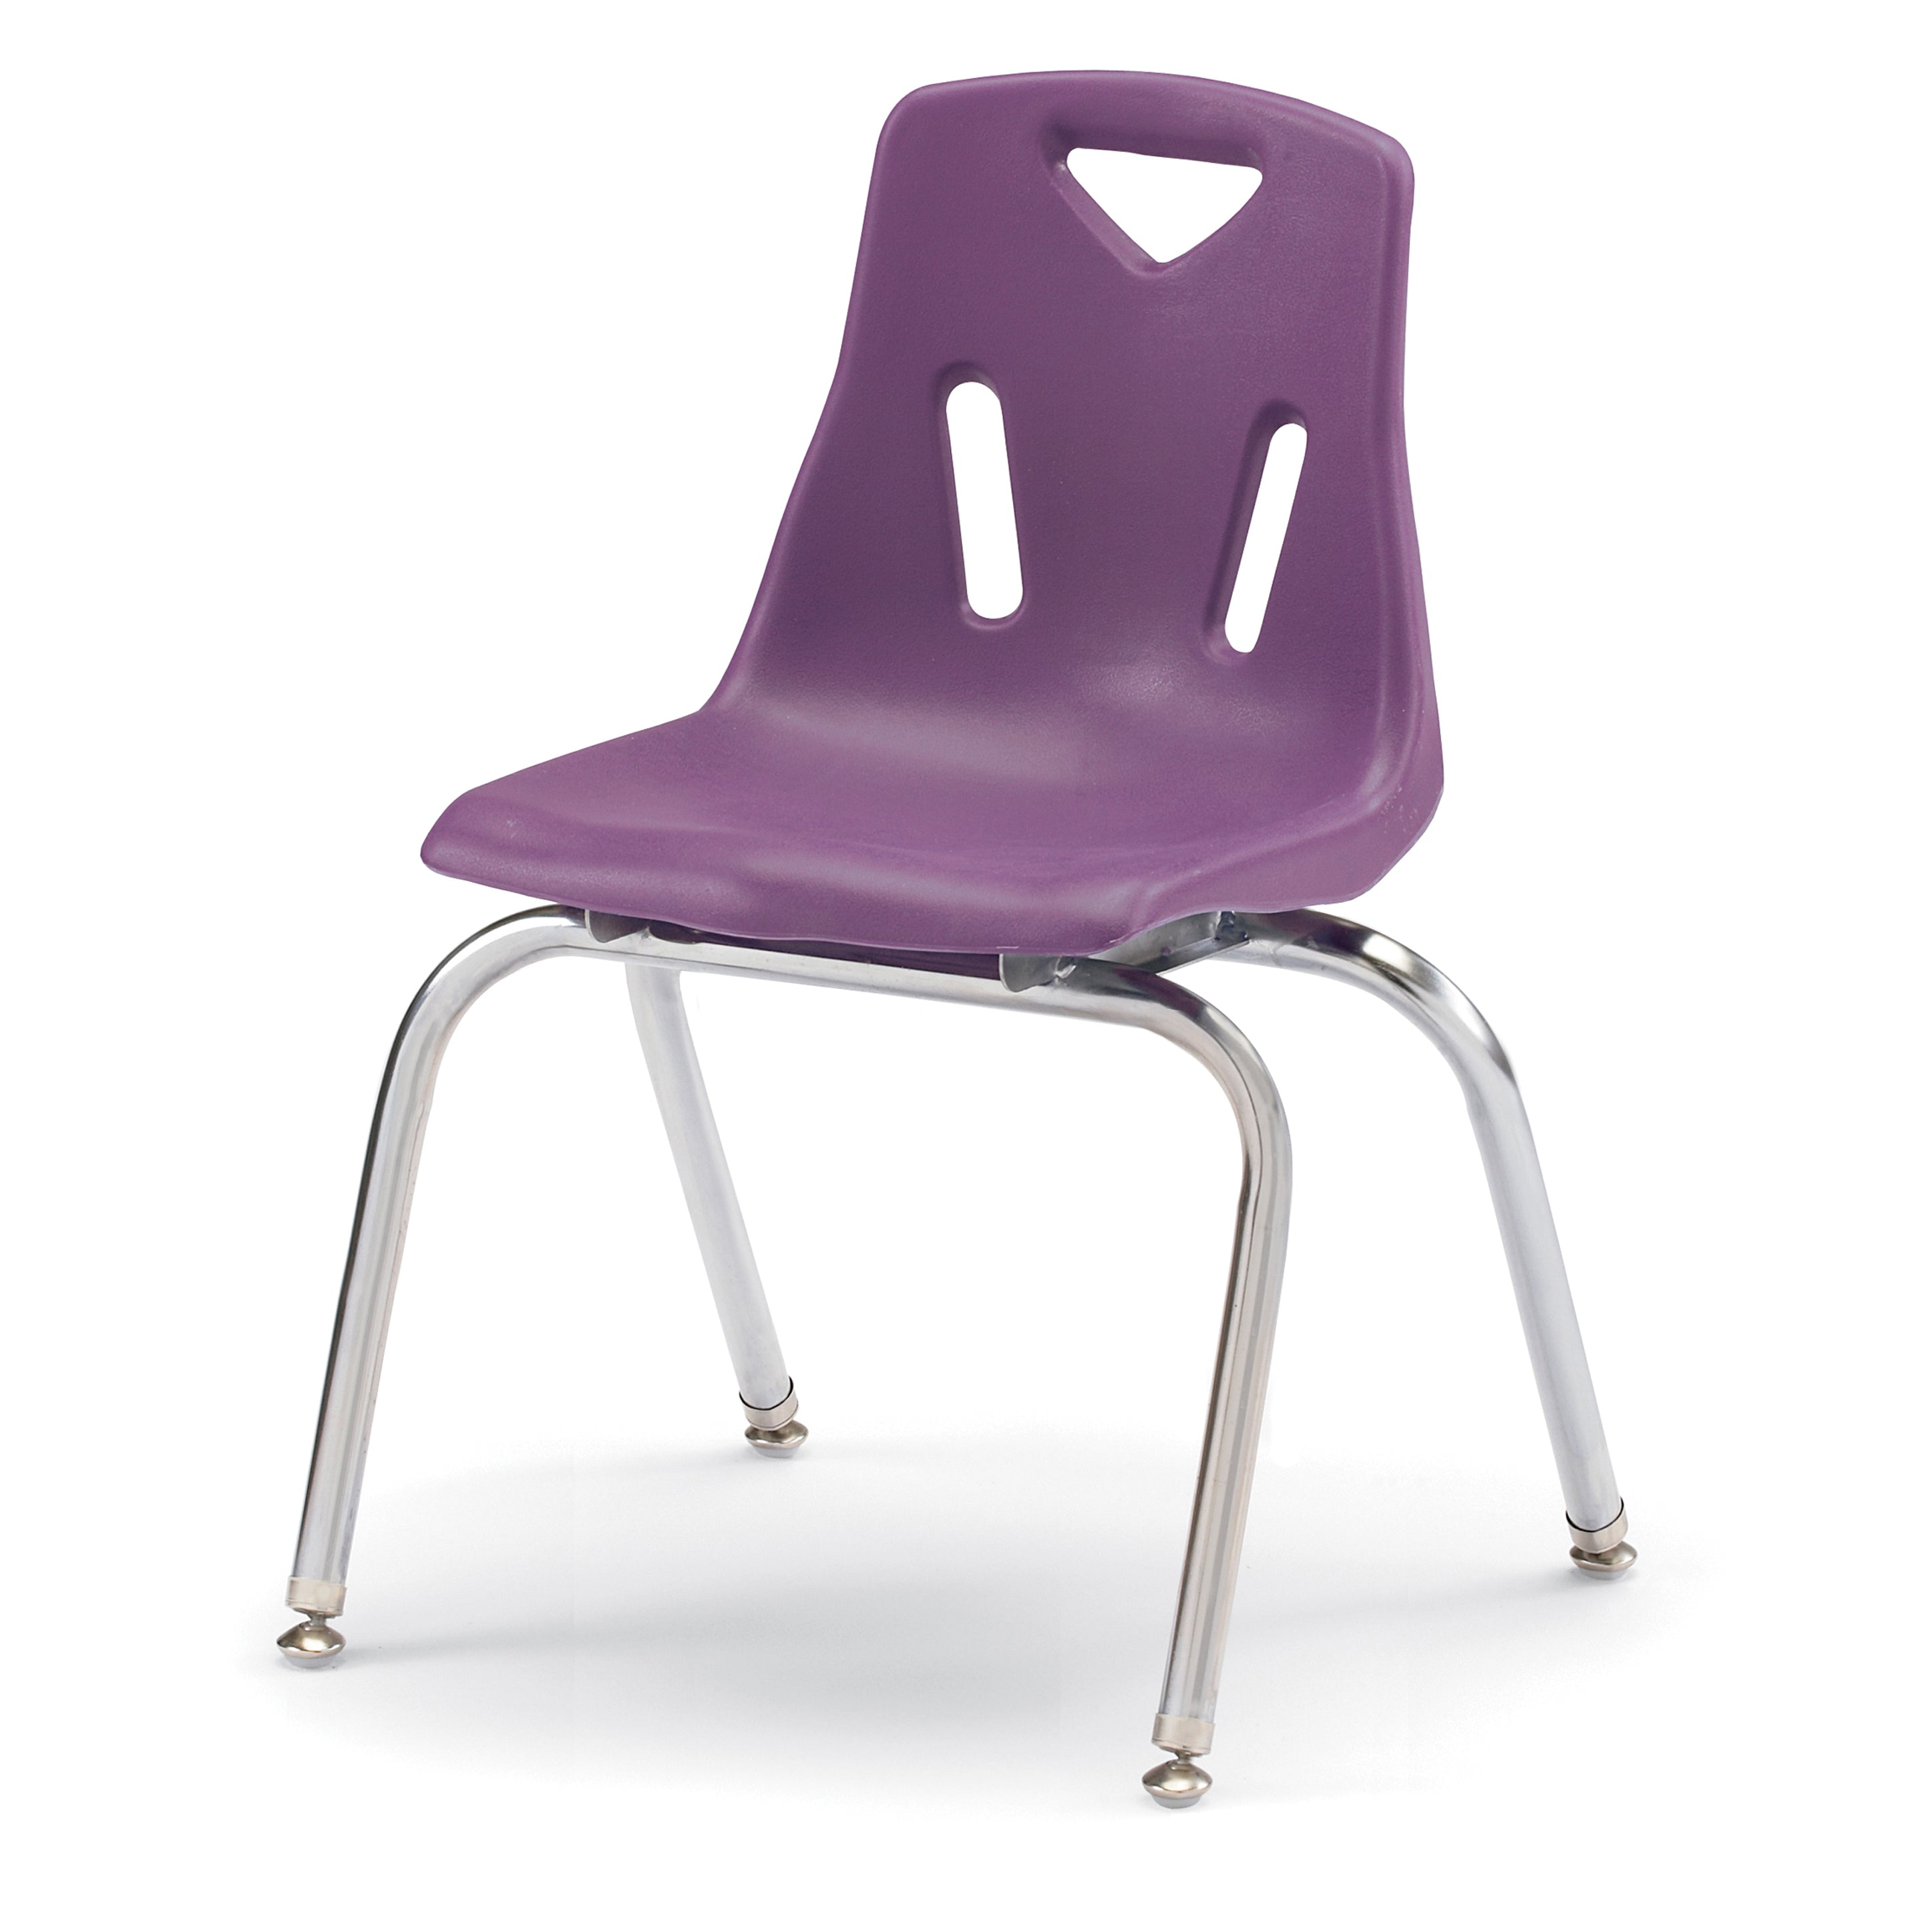 8146JC1004, Berries Stacking Chair with Chrome-Plated Legs - 16" Ht - Purple